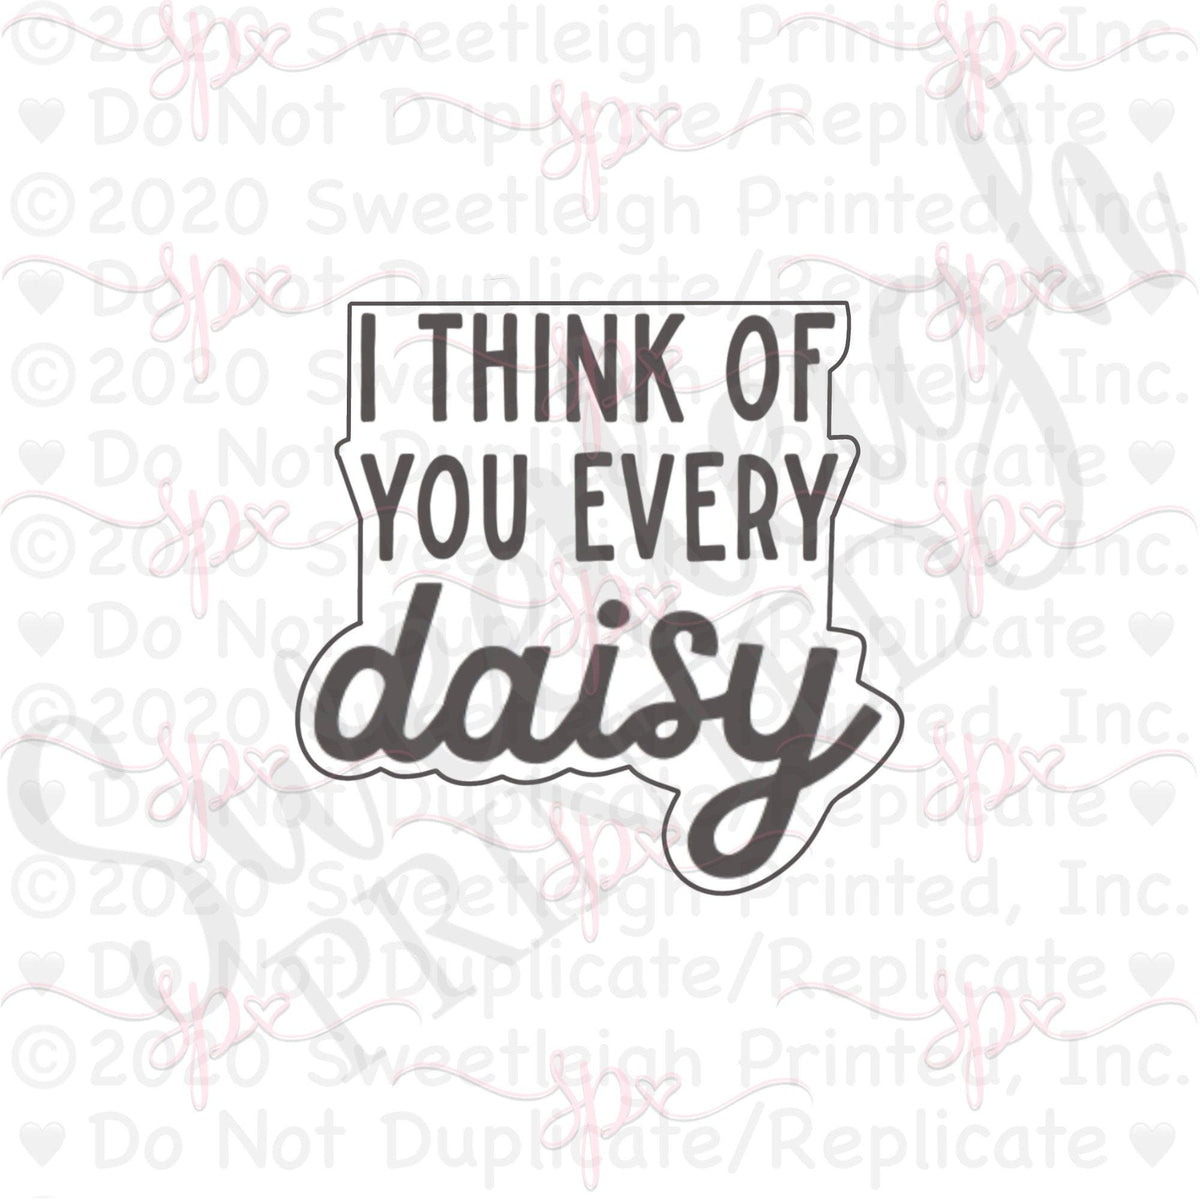 I Think of You Every Daisy Hand Lettered Cookie Cutter - Sweetleigh 